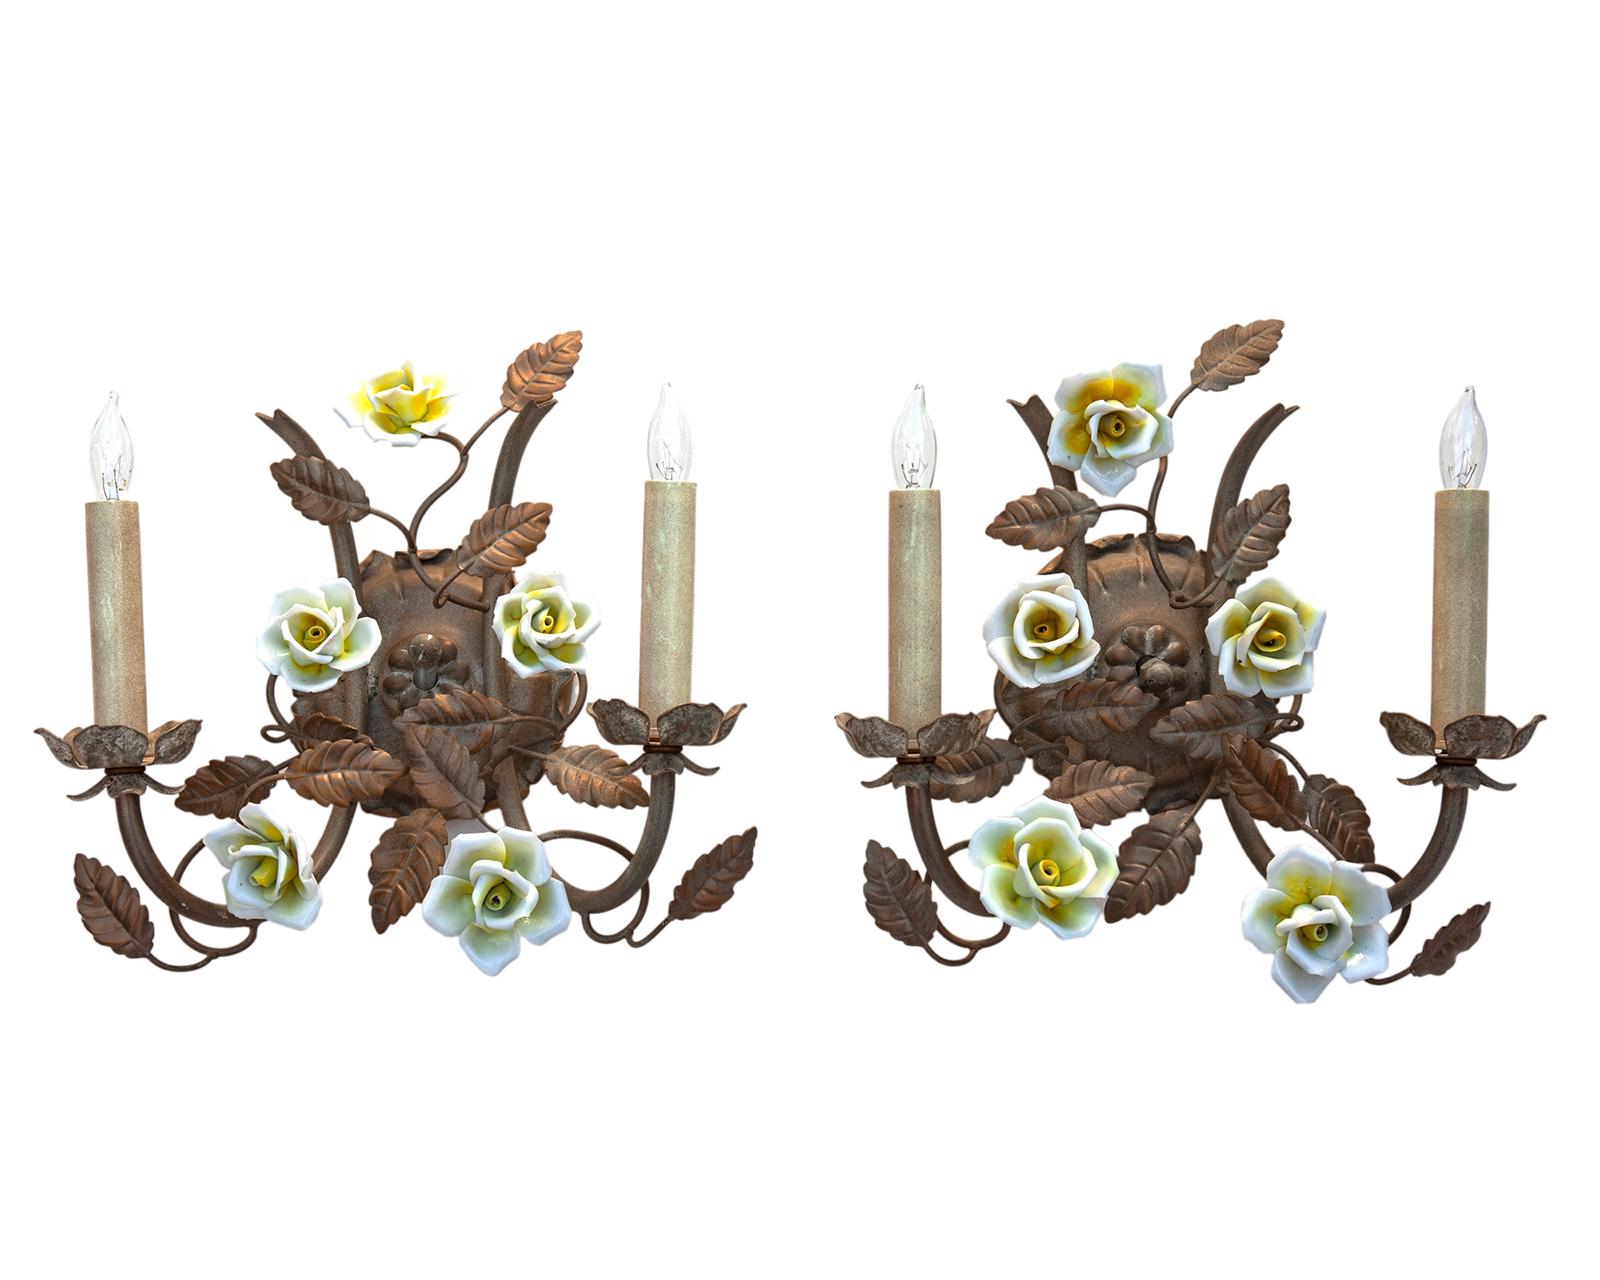 Charming pair of wall sconces with ceramic flowers, wired for US.
The sconces are in as found condition with the original finish.
A faded metal finish in the background highlighting just the flowers when lit.

